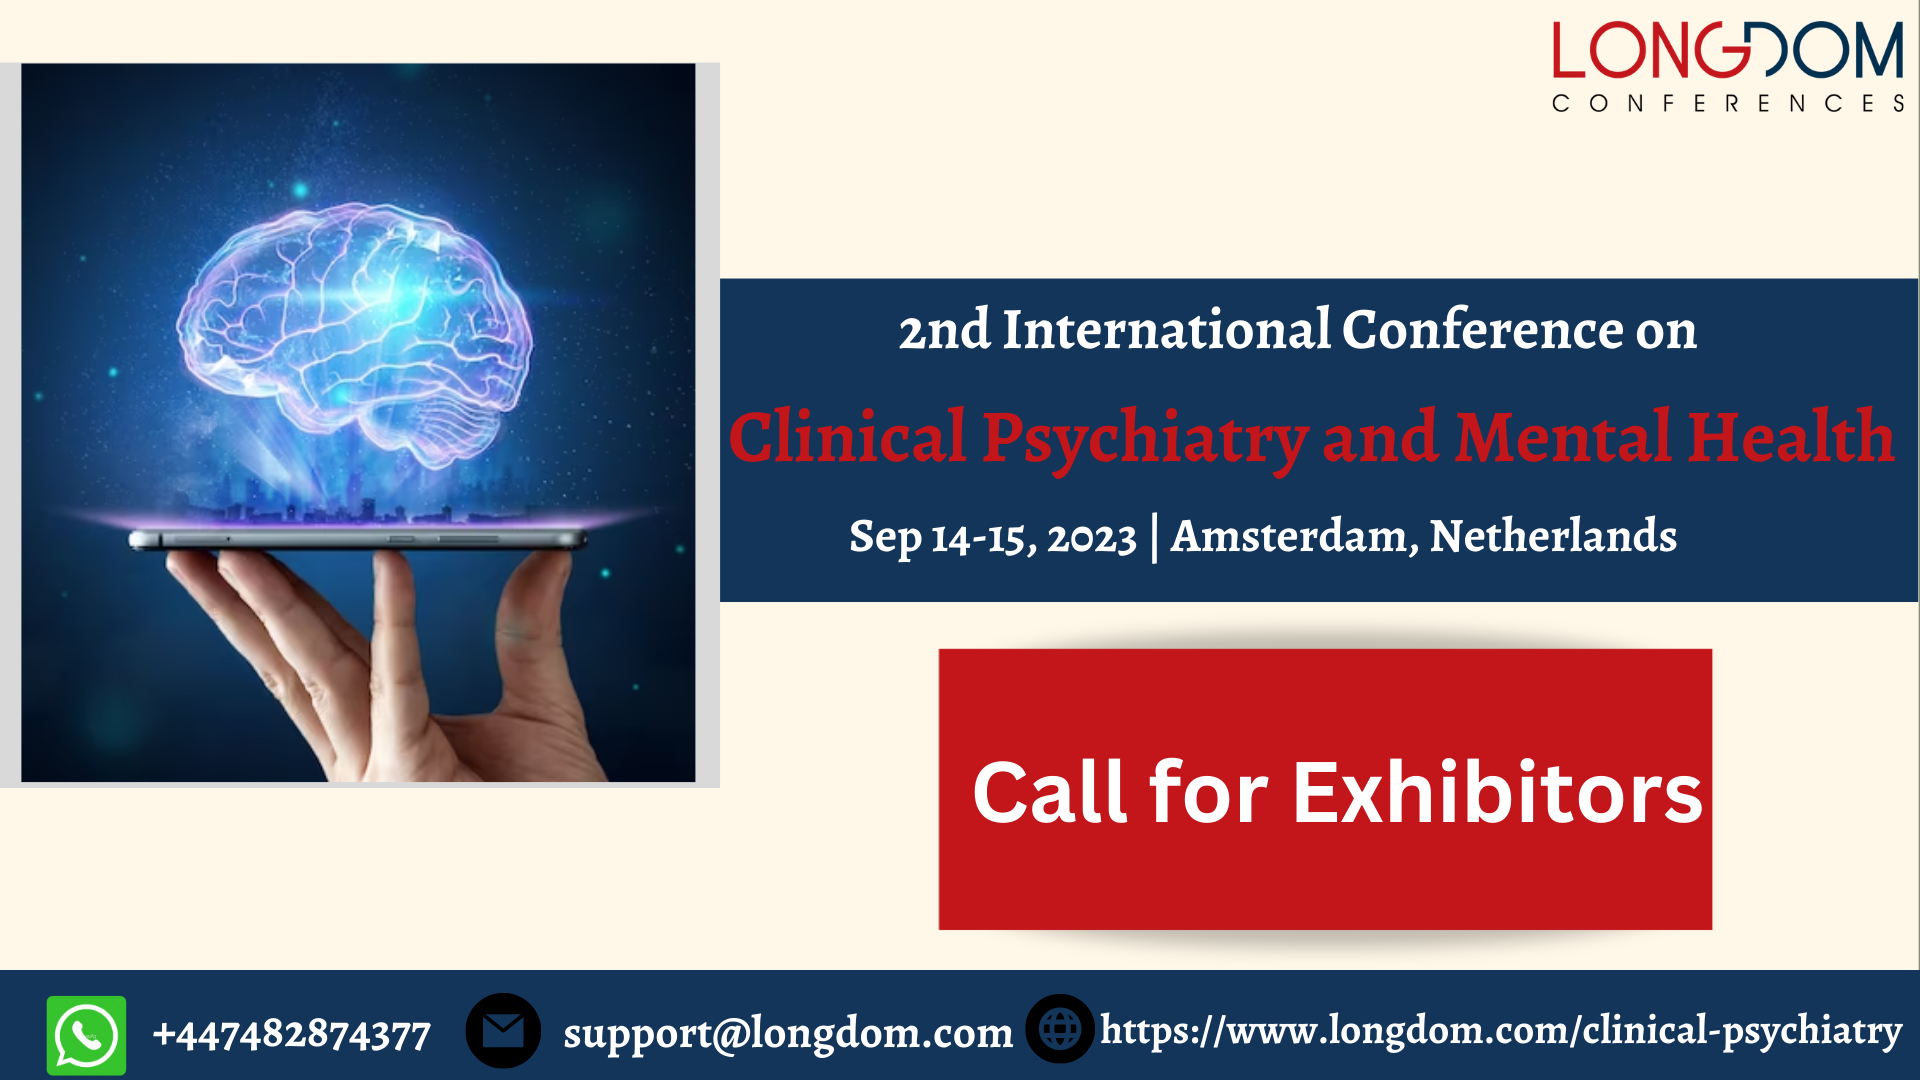 Globalize your Research at Clinical Psychiatry 2023 LONGDOM Conferences